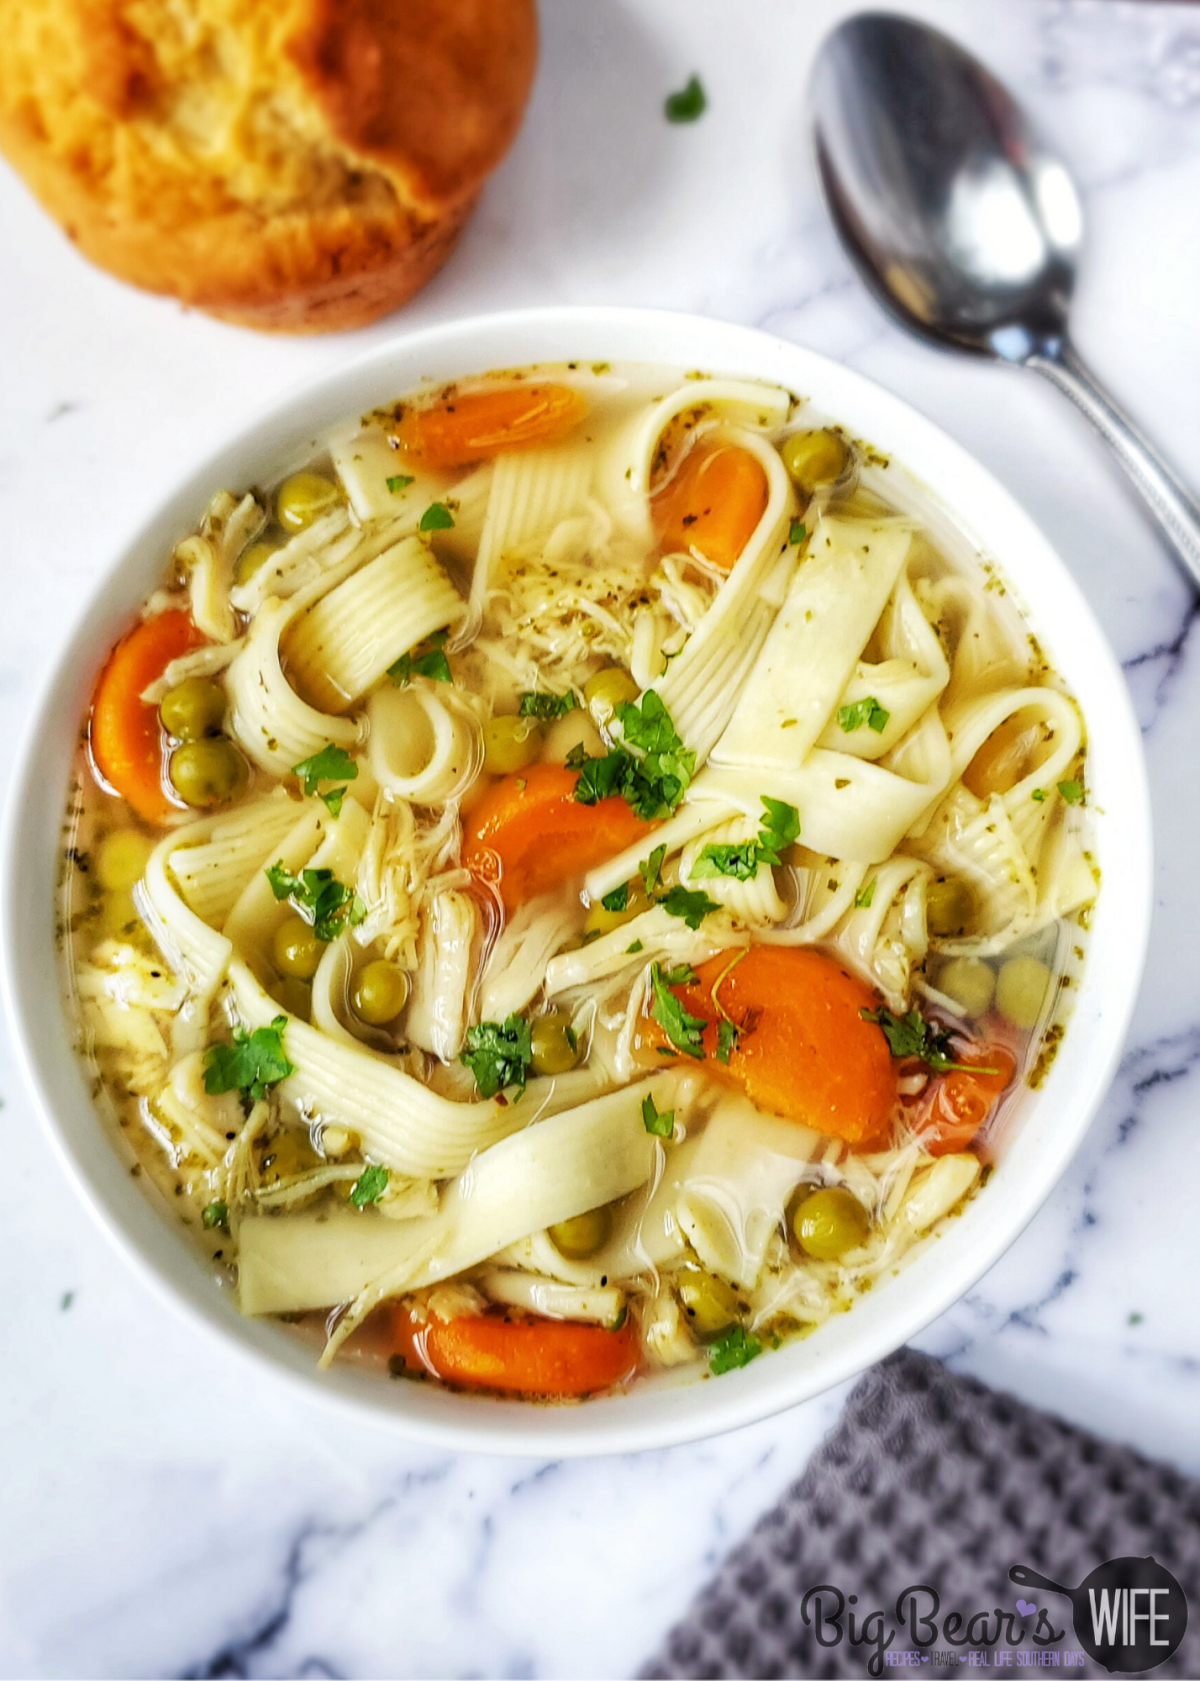 Cook In / Dine Out: Chicken Noodle Soup with Homemade Broth